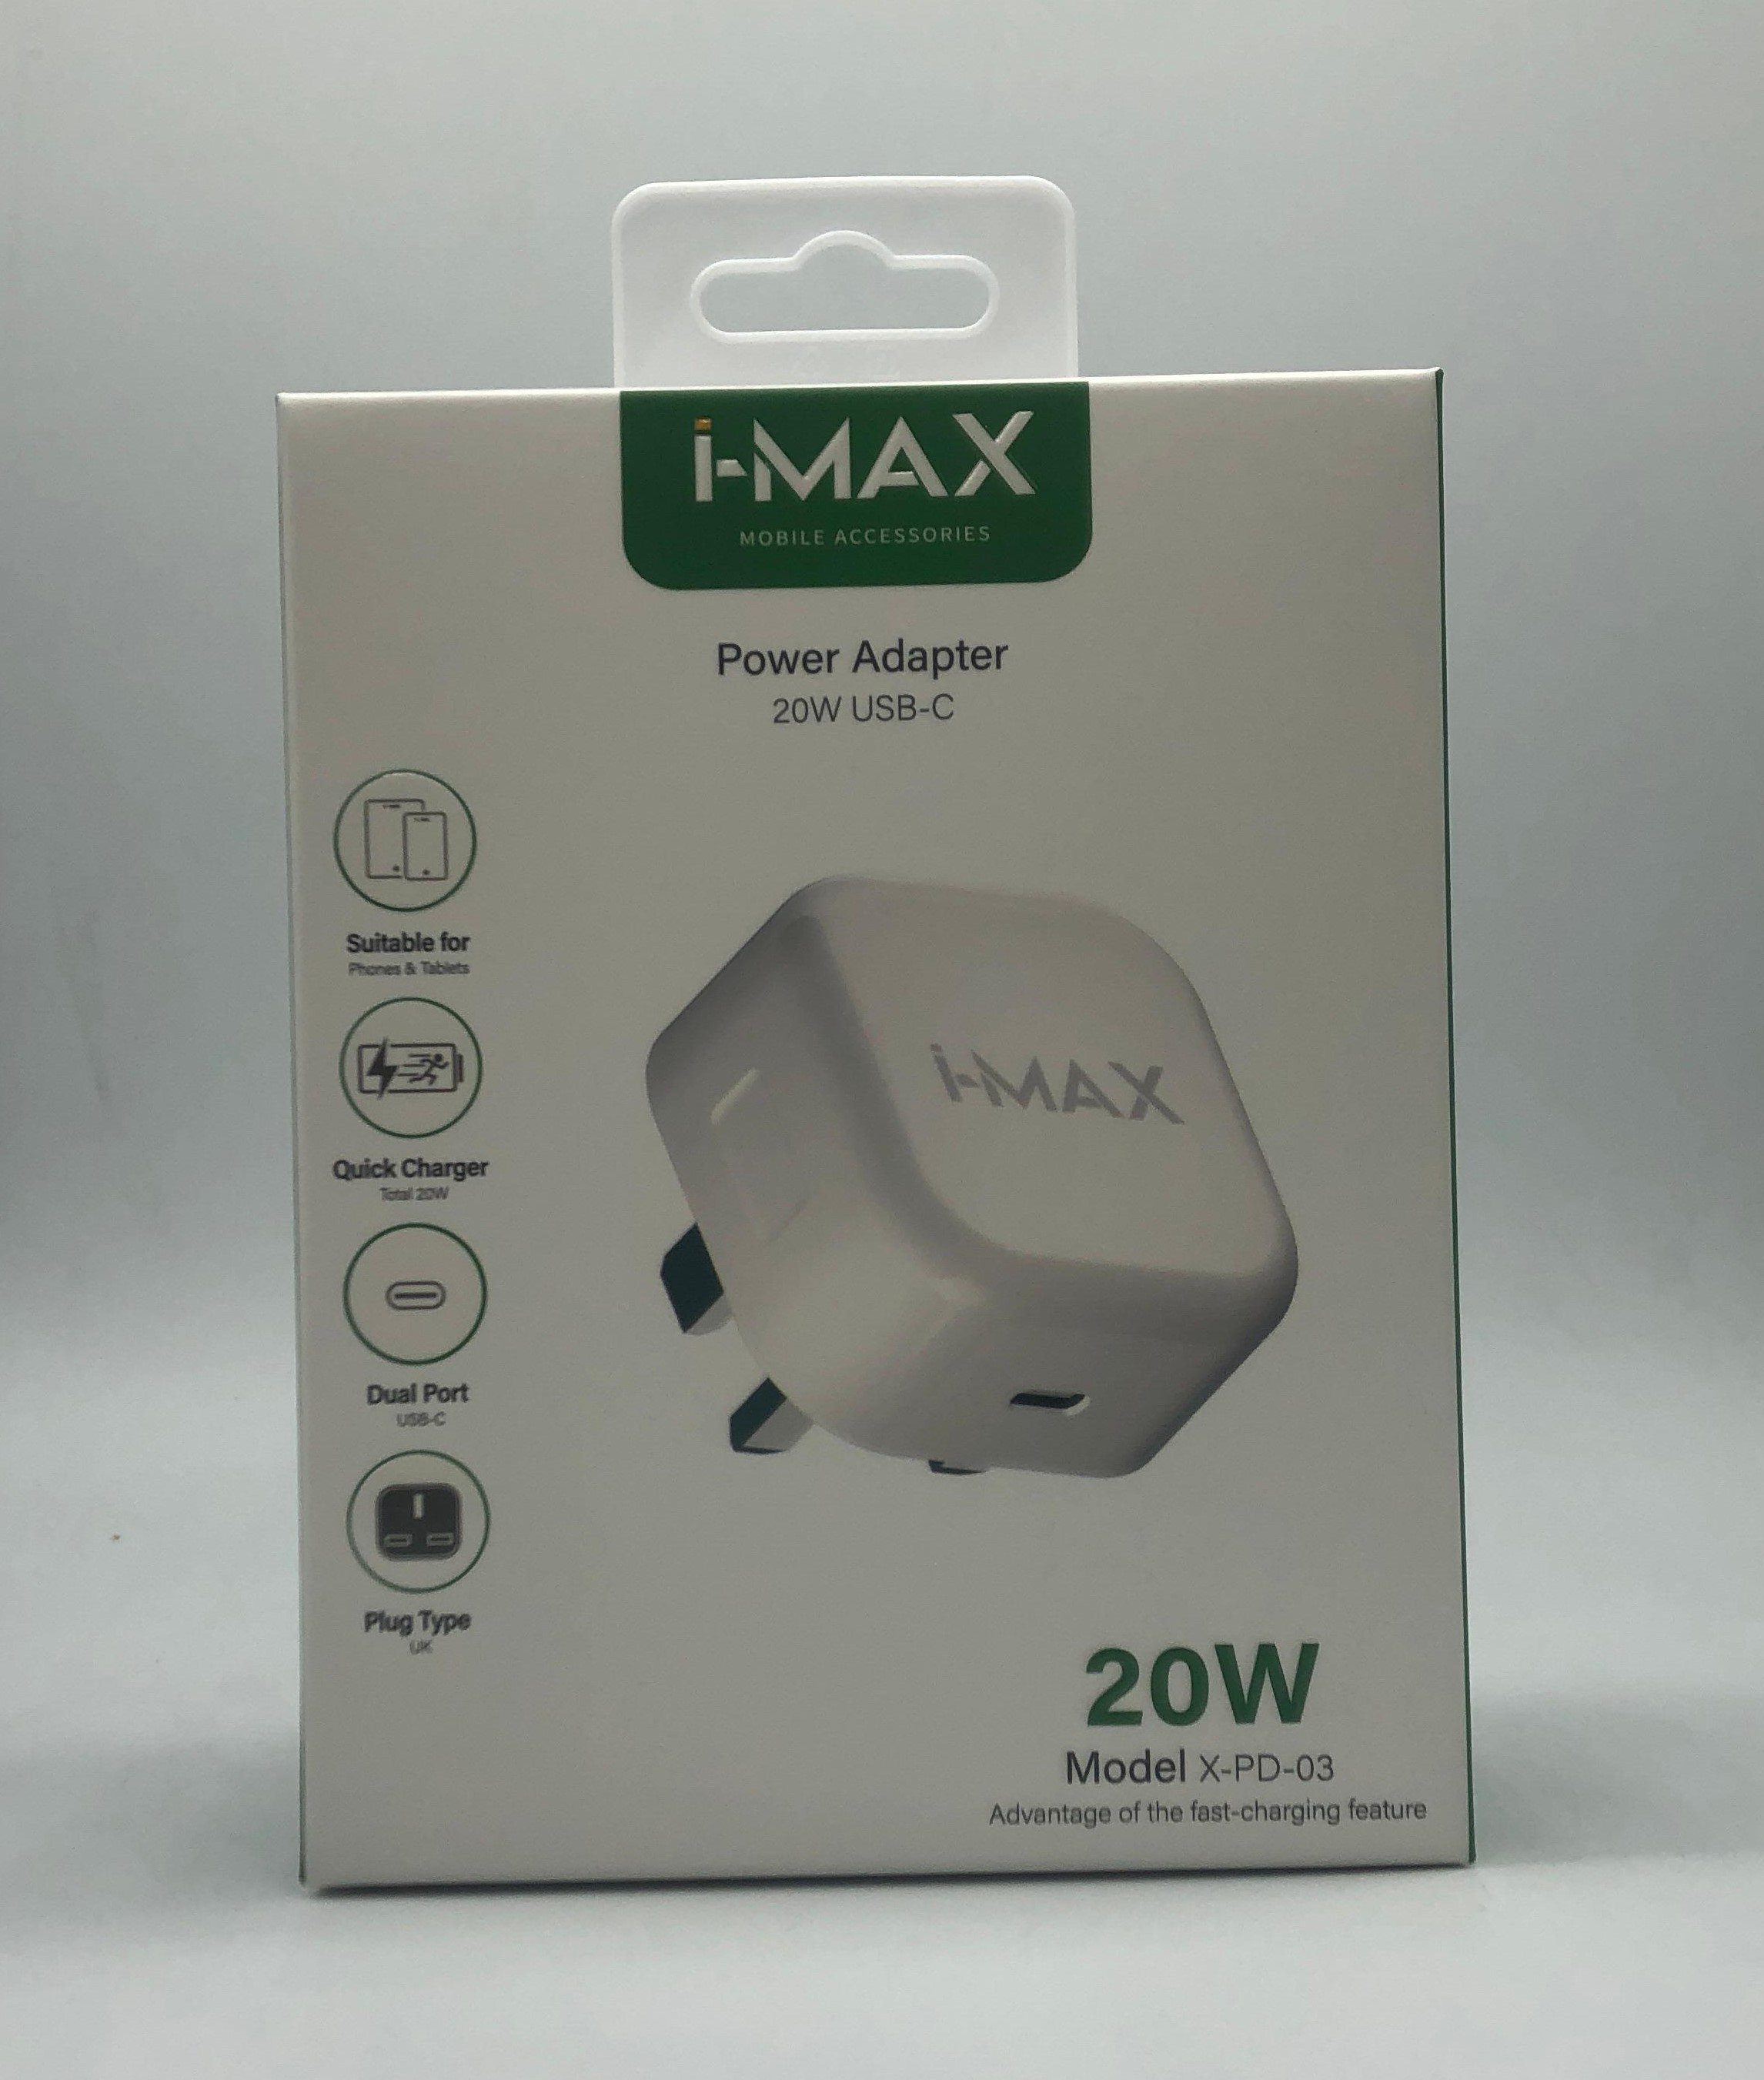 Power Adapter 20W PD-03